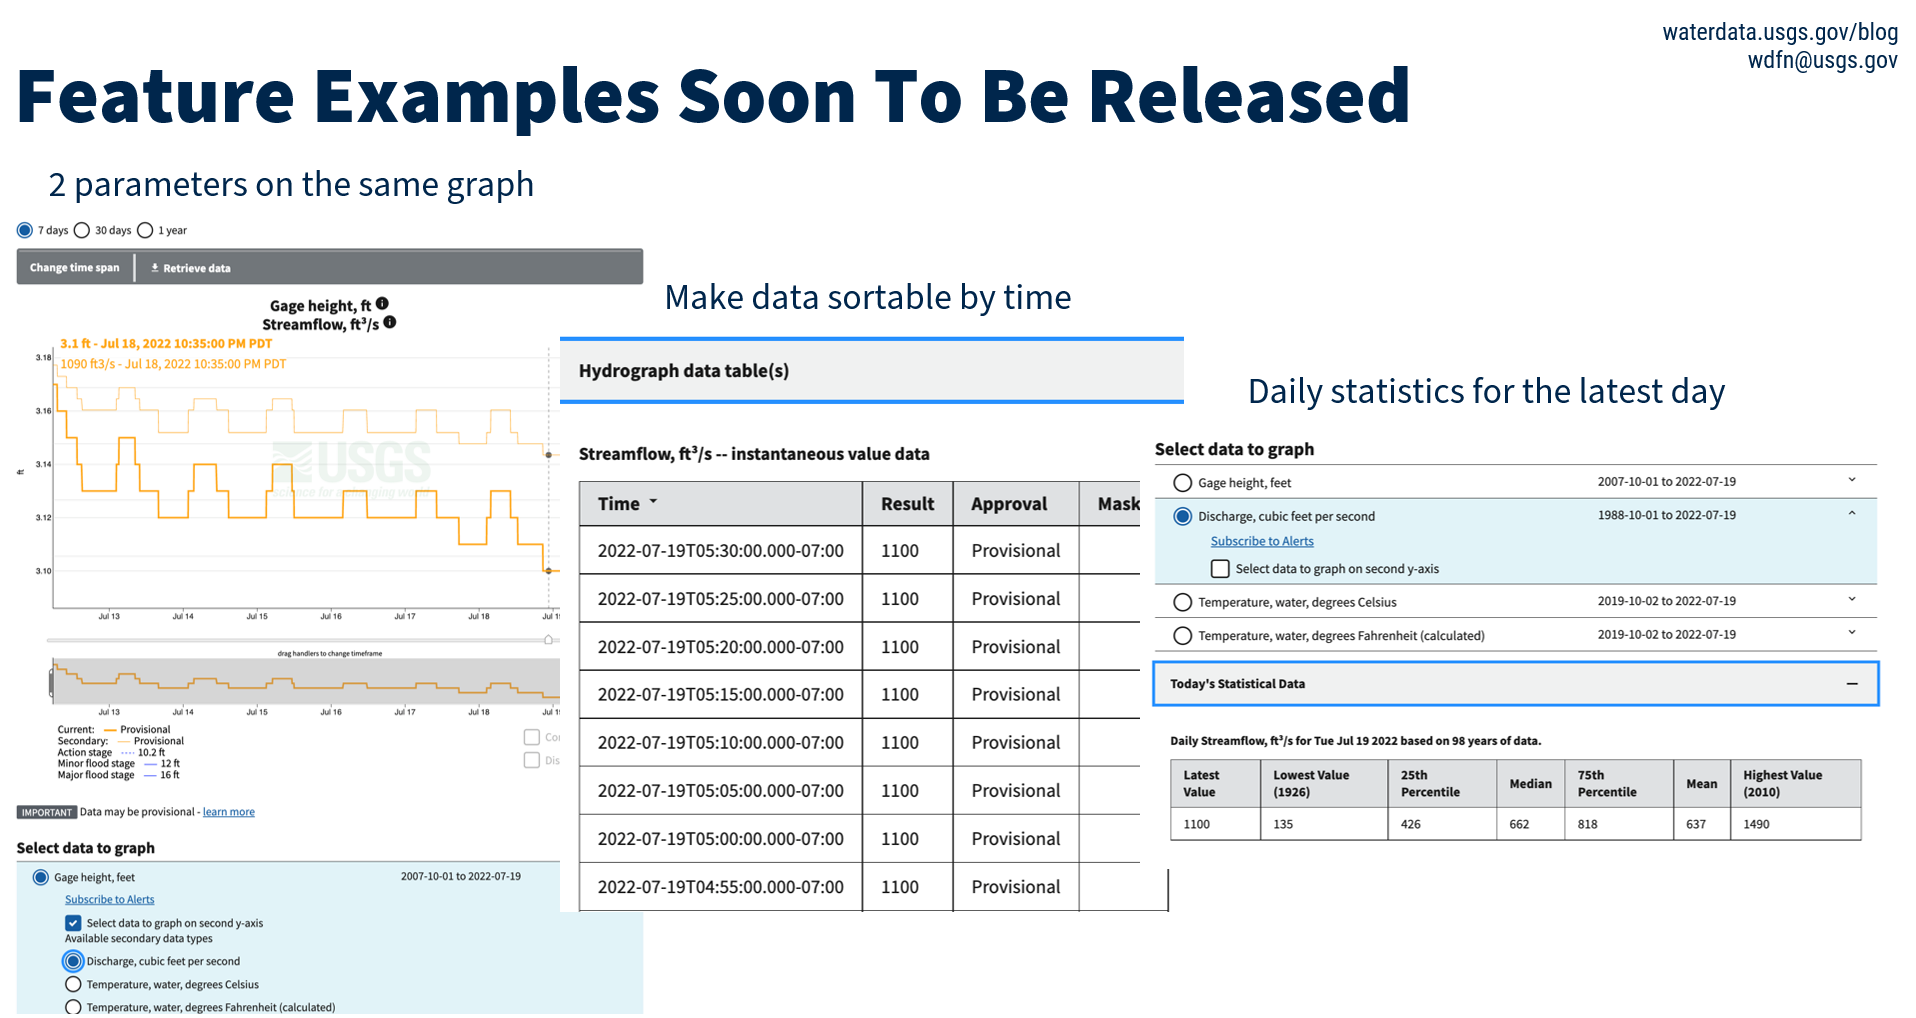 screenshot of 3 upcoming features: 2 parameters on the same graph, make data sortable by time, daily statistics for the latest day.